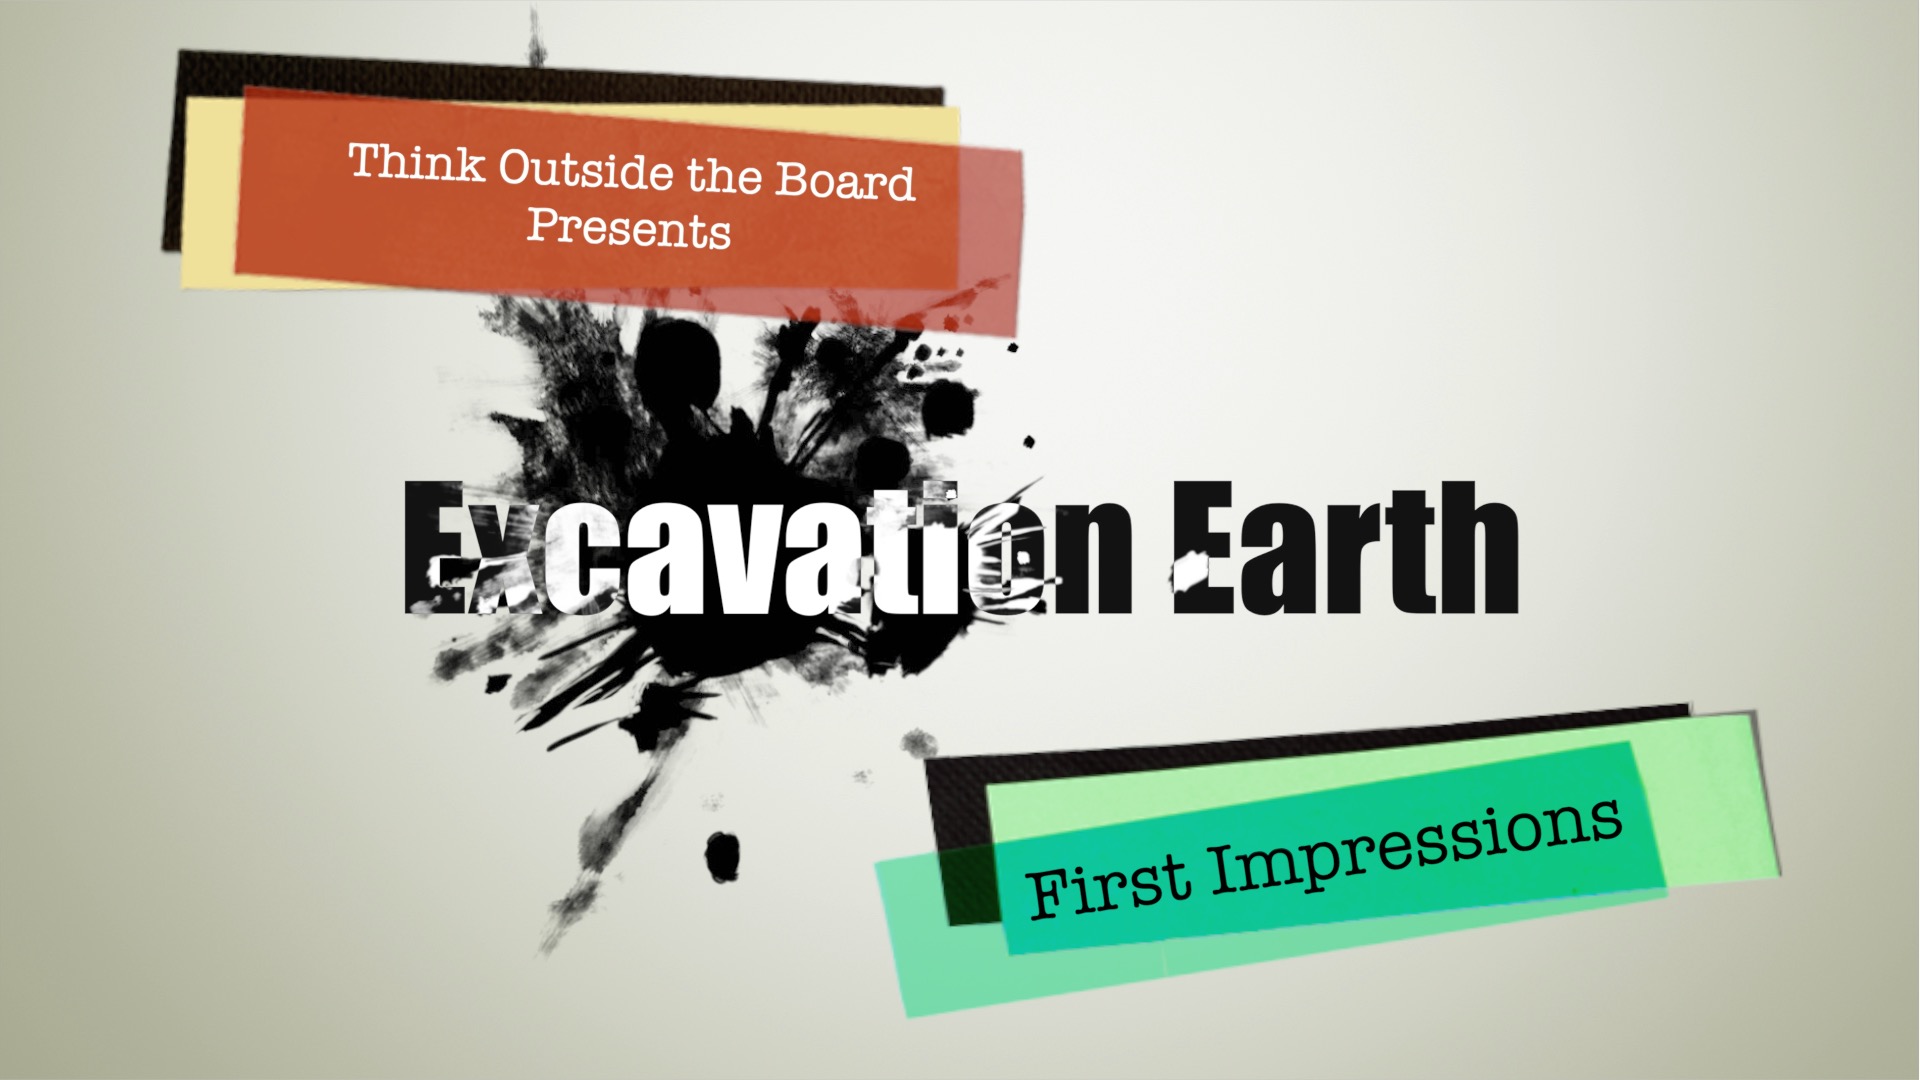 Excavation Earth First Impressions